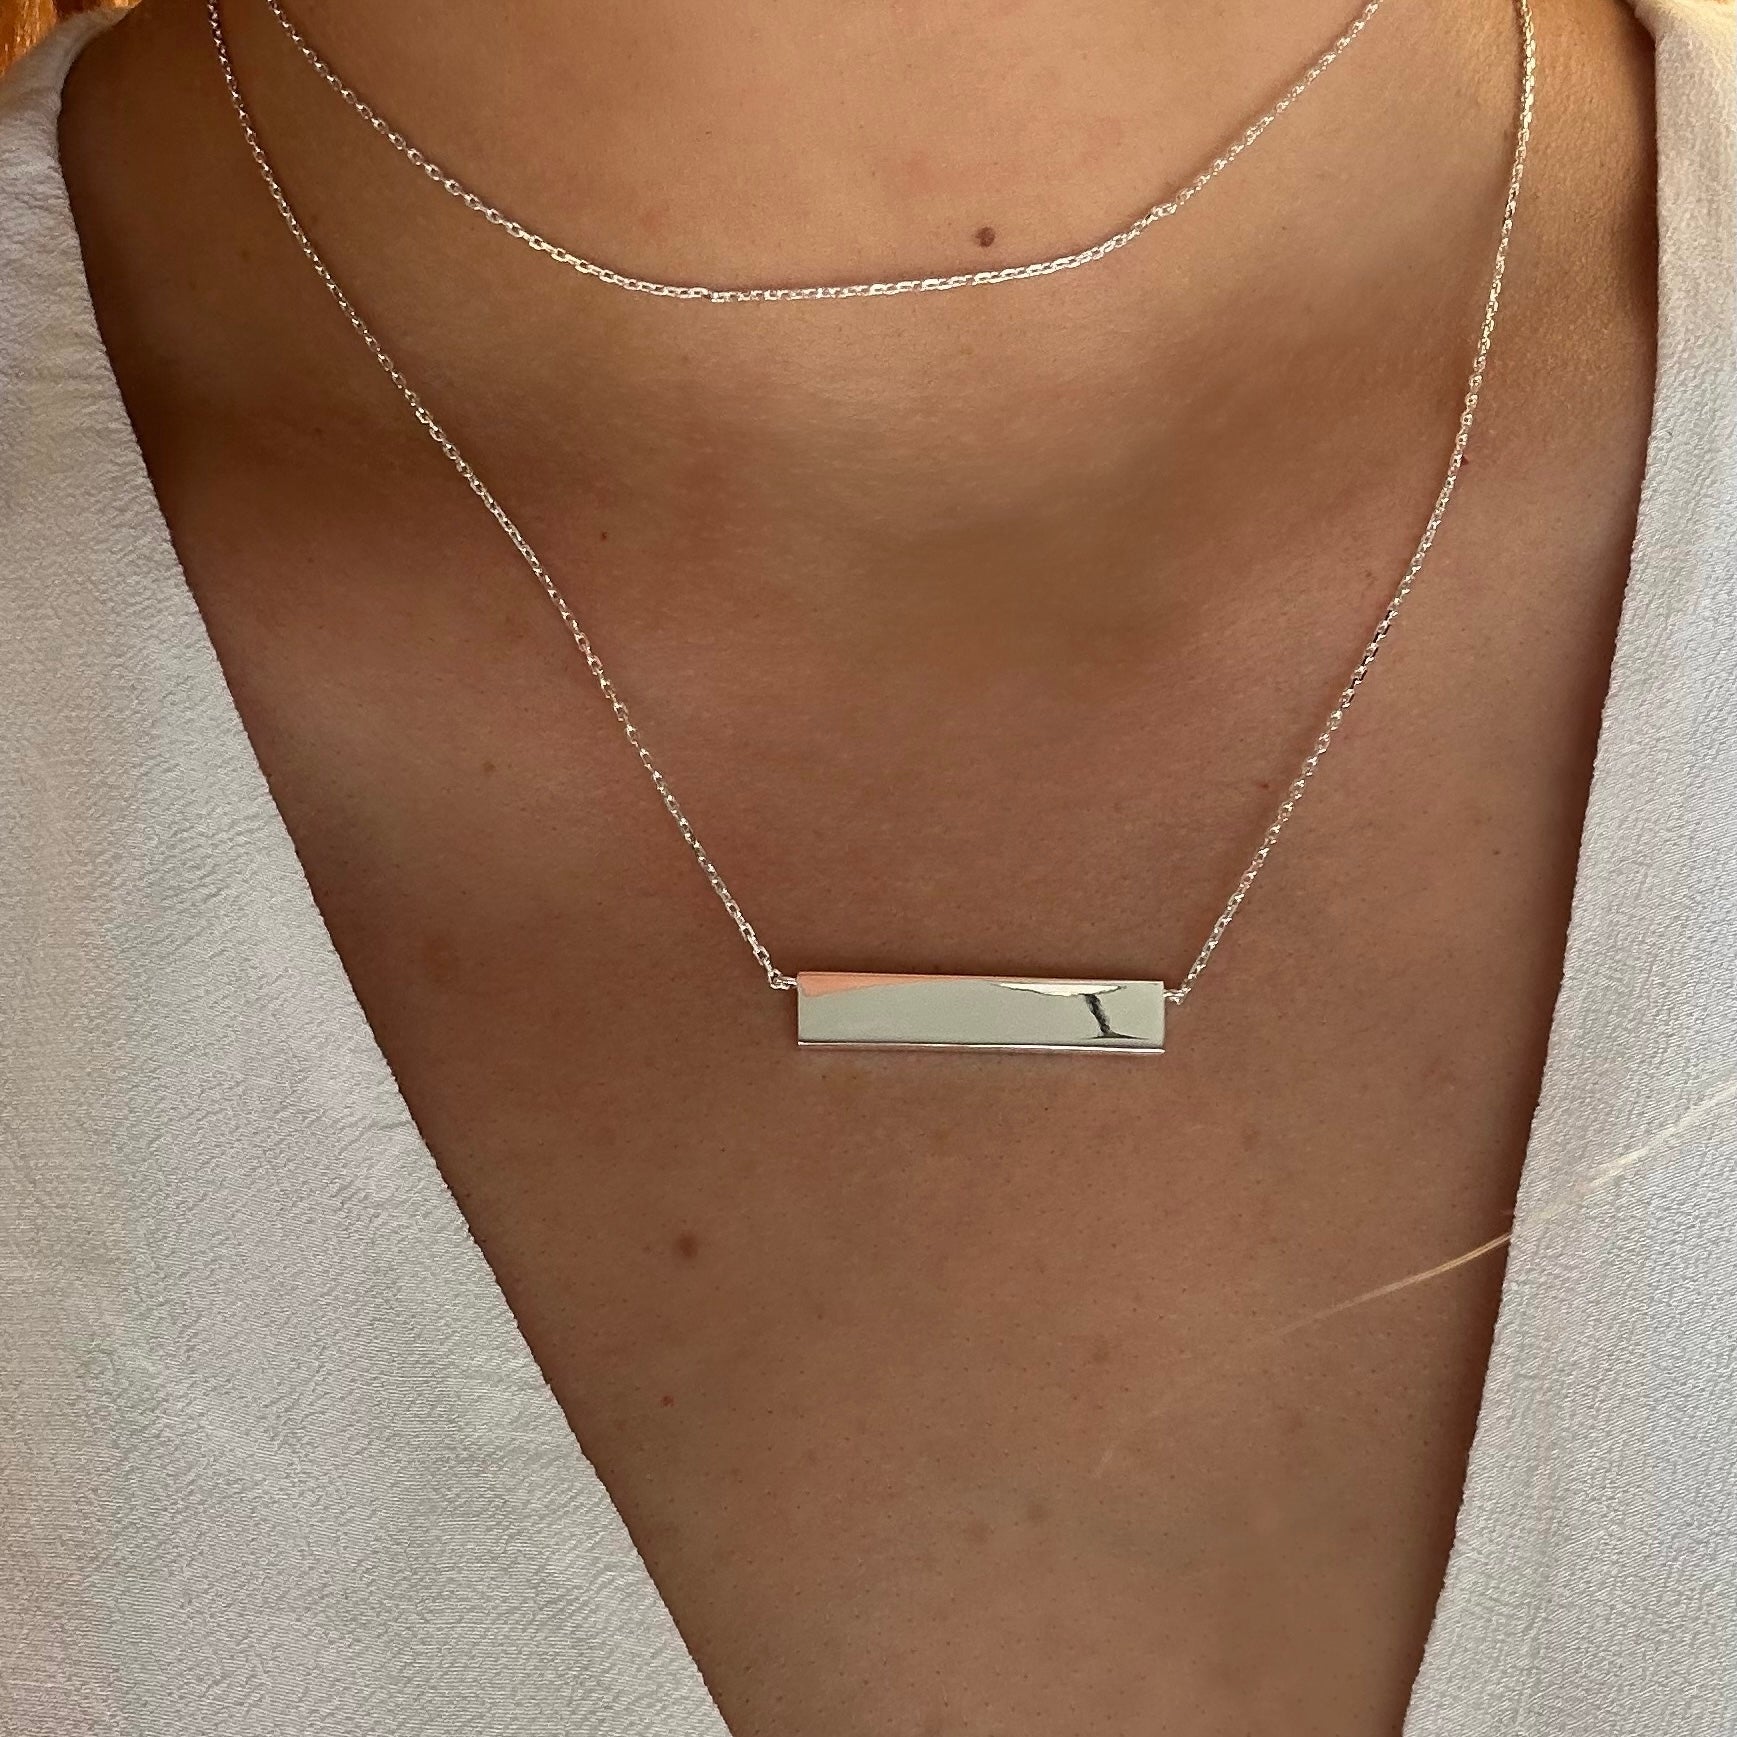 This photo is of a sleek Engravable Silver Bar Necklace which is around the neck of a lady and elegantly rests just below the collarbone.  The high-polish finish captures light beautifully, making it a versatile piece for both personal branding and meaningful gifts. This necklace is made for customized engraving with a Danibydsgn's custom logo design turning a simple silver bar necklace into a unique piece of personalized jewelry, perfect as a keepsake jewelry item or a personalized gift. 